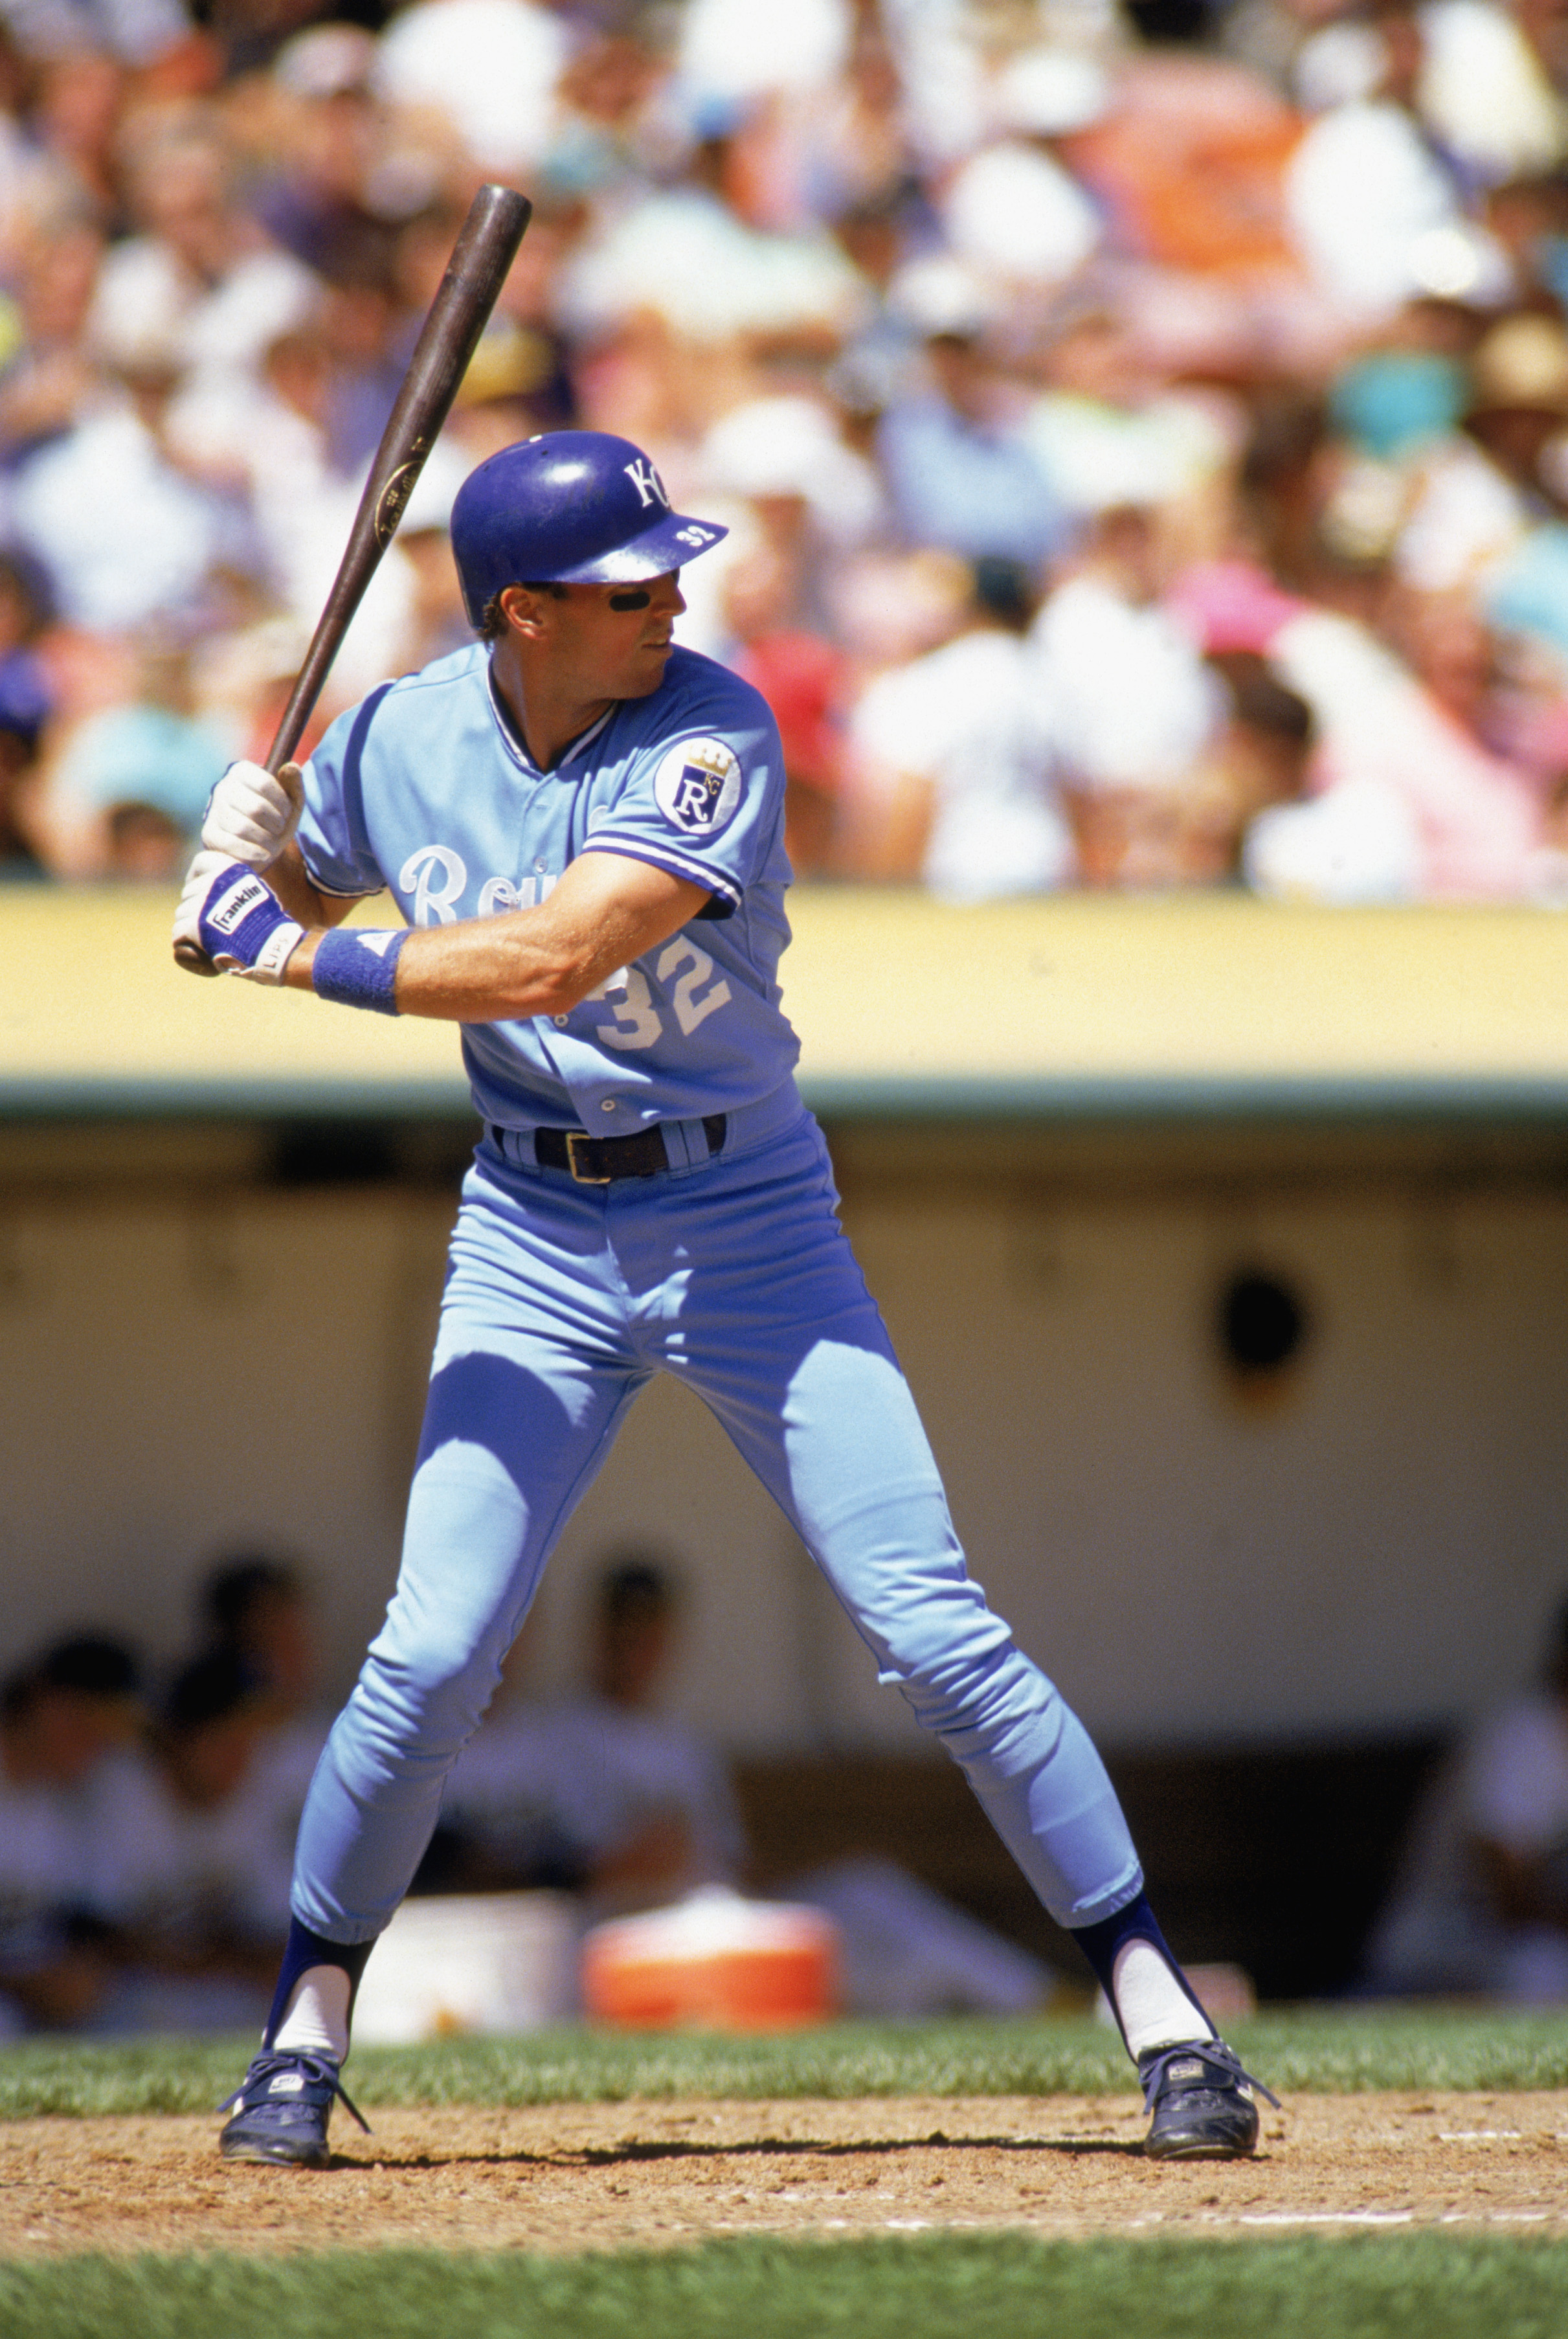 Bill Pecota played in the majors from 1986-1994 and lent his name to Baseball Prospectus's projection system.